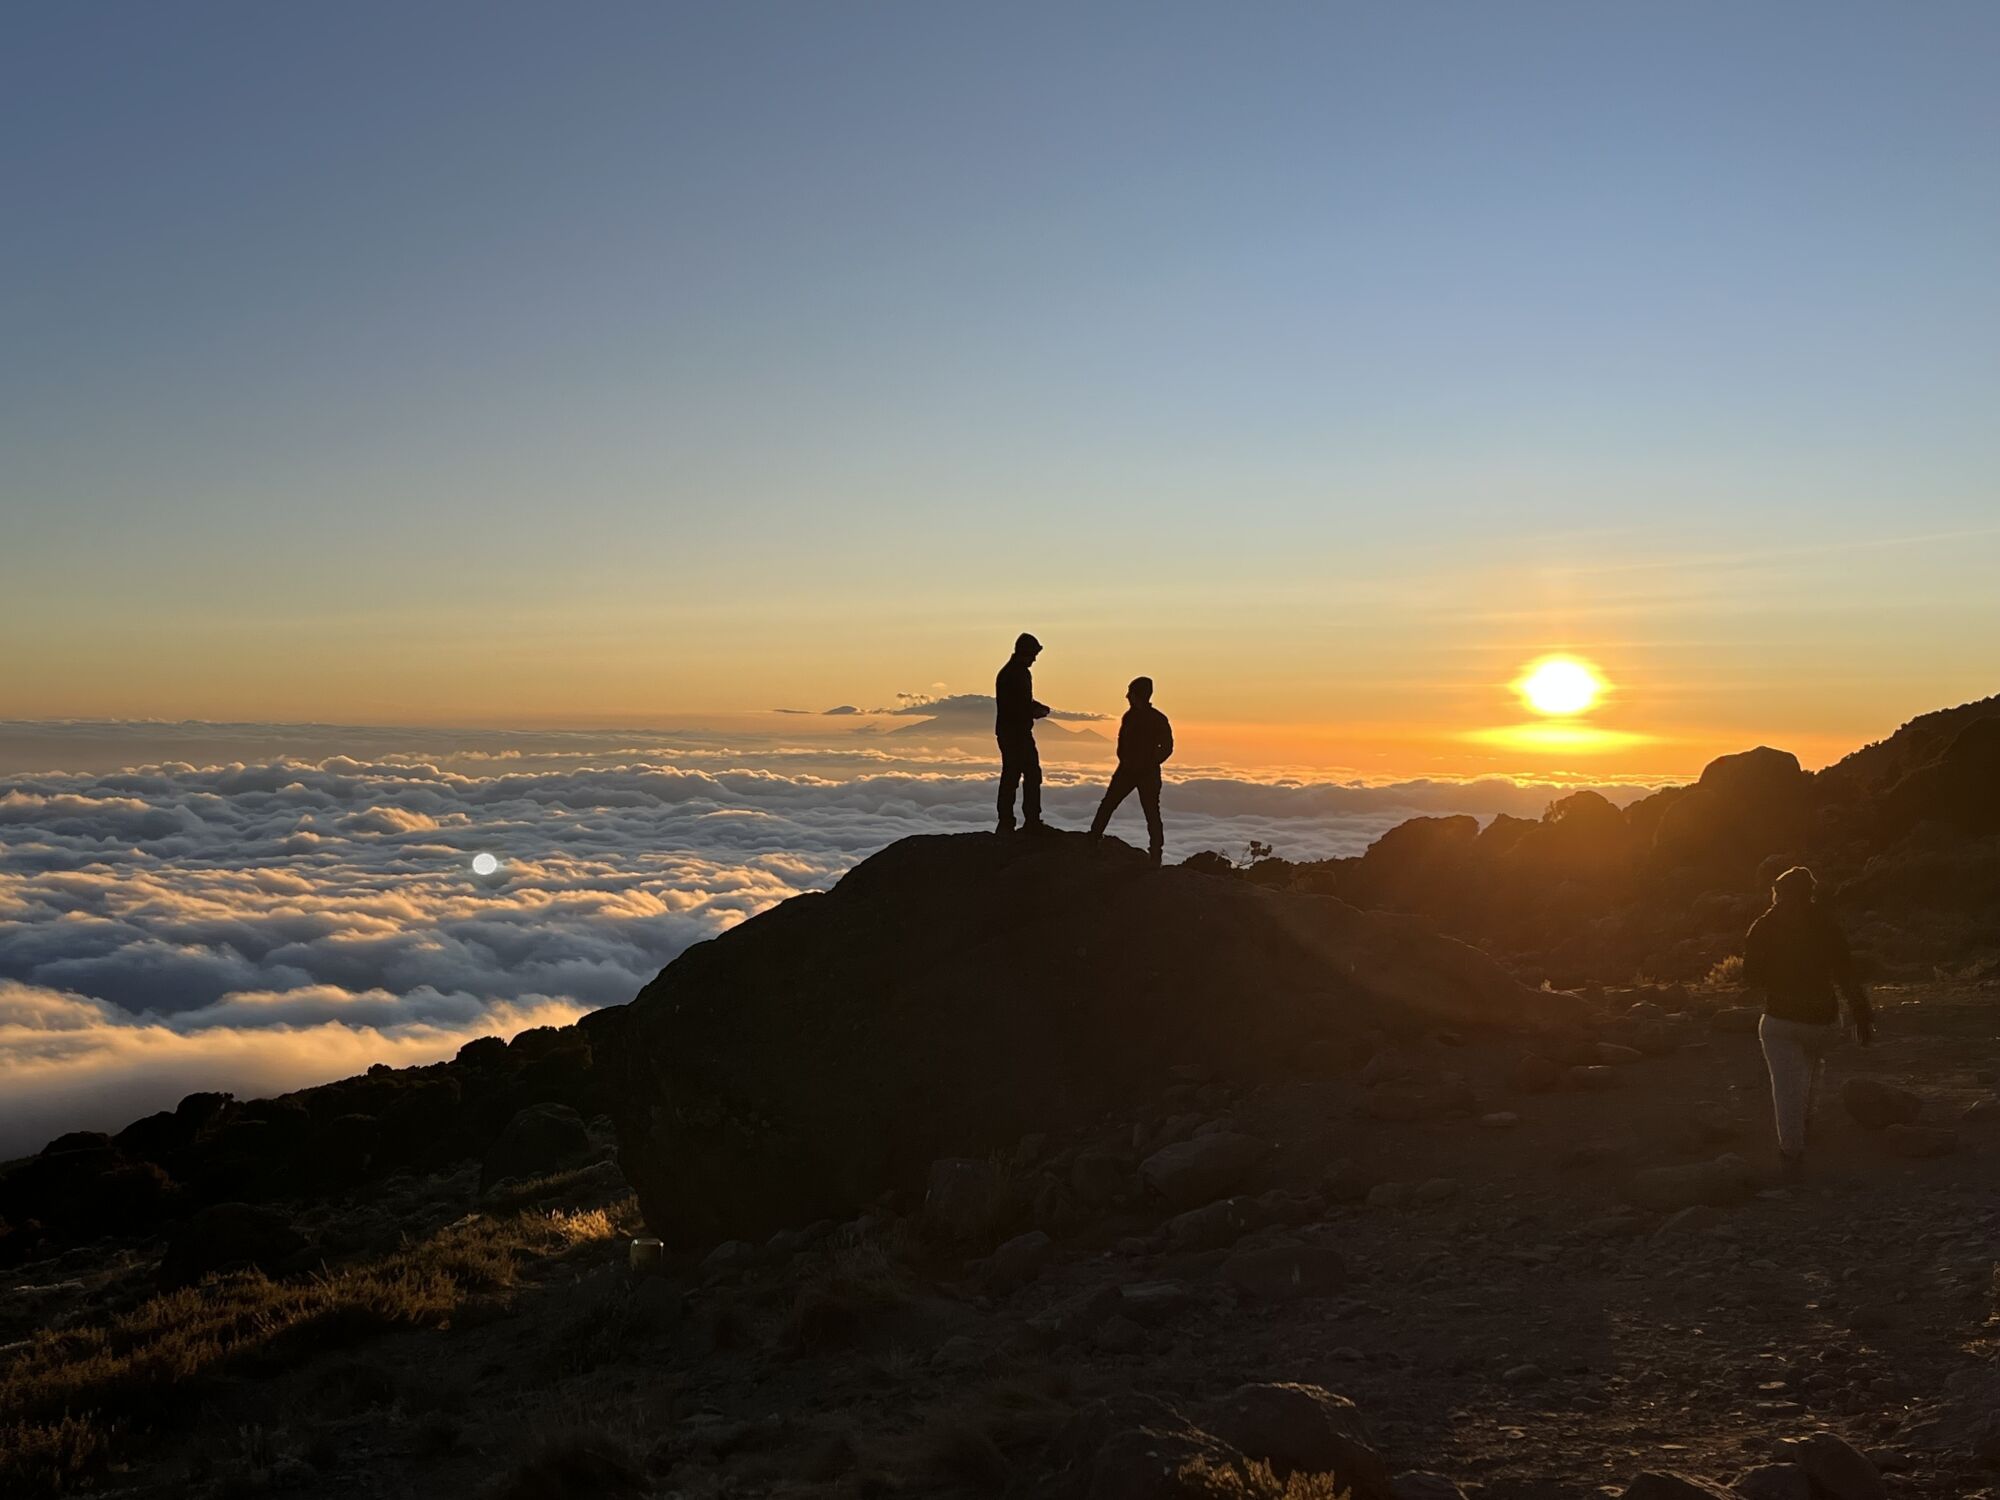 Two people, seen in silhouette in the distance, stand on a peak above clouds as the sun goes down